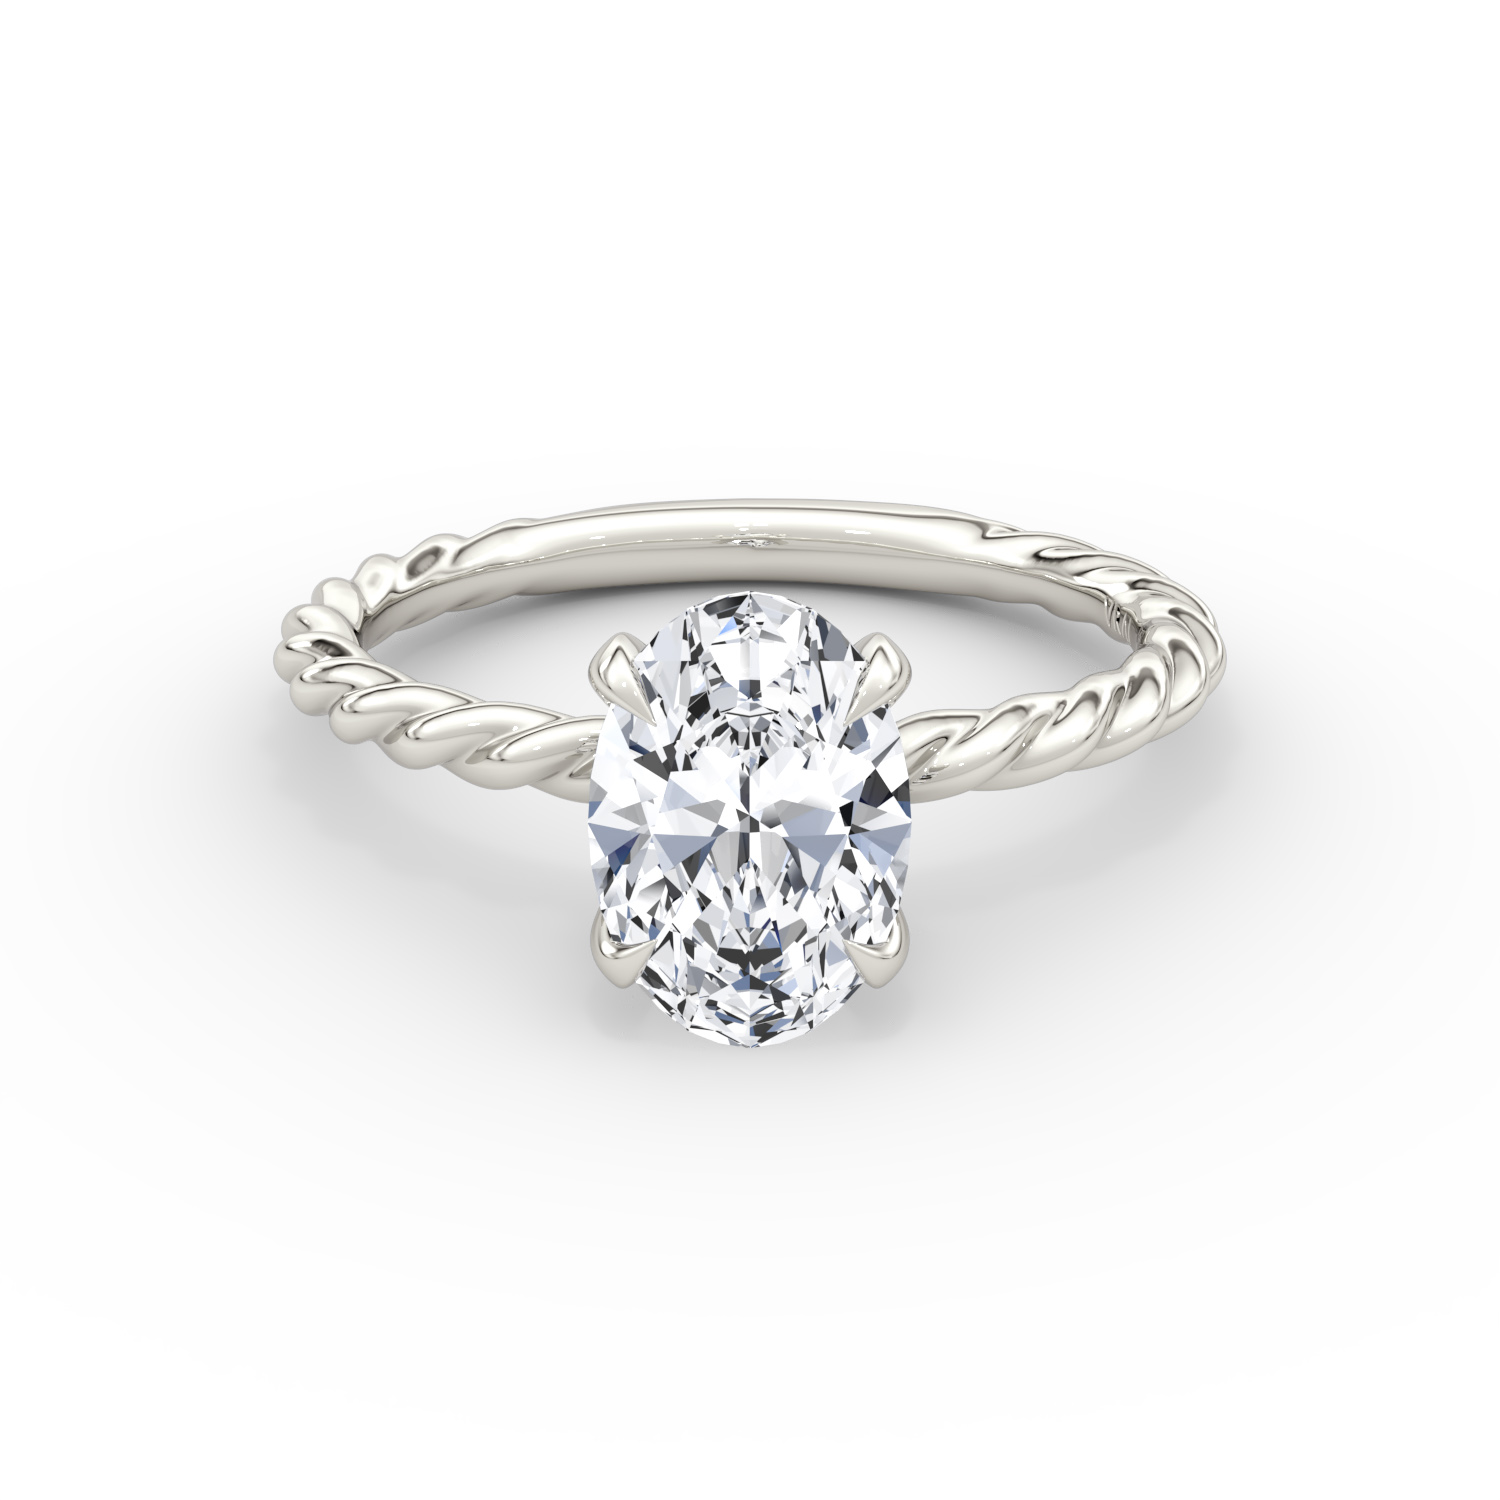 Twisted Rope Solitaire Engagement Ring in 18k White Gold: Solitaire Engagement  Rings Houston, Twisted Solitaire Engagement Rings